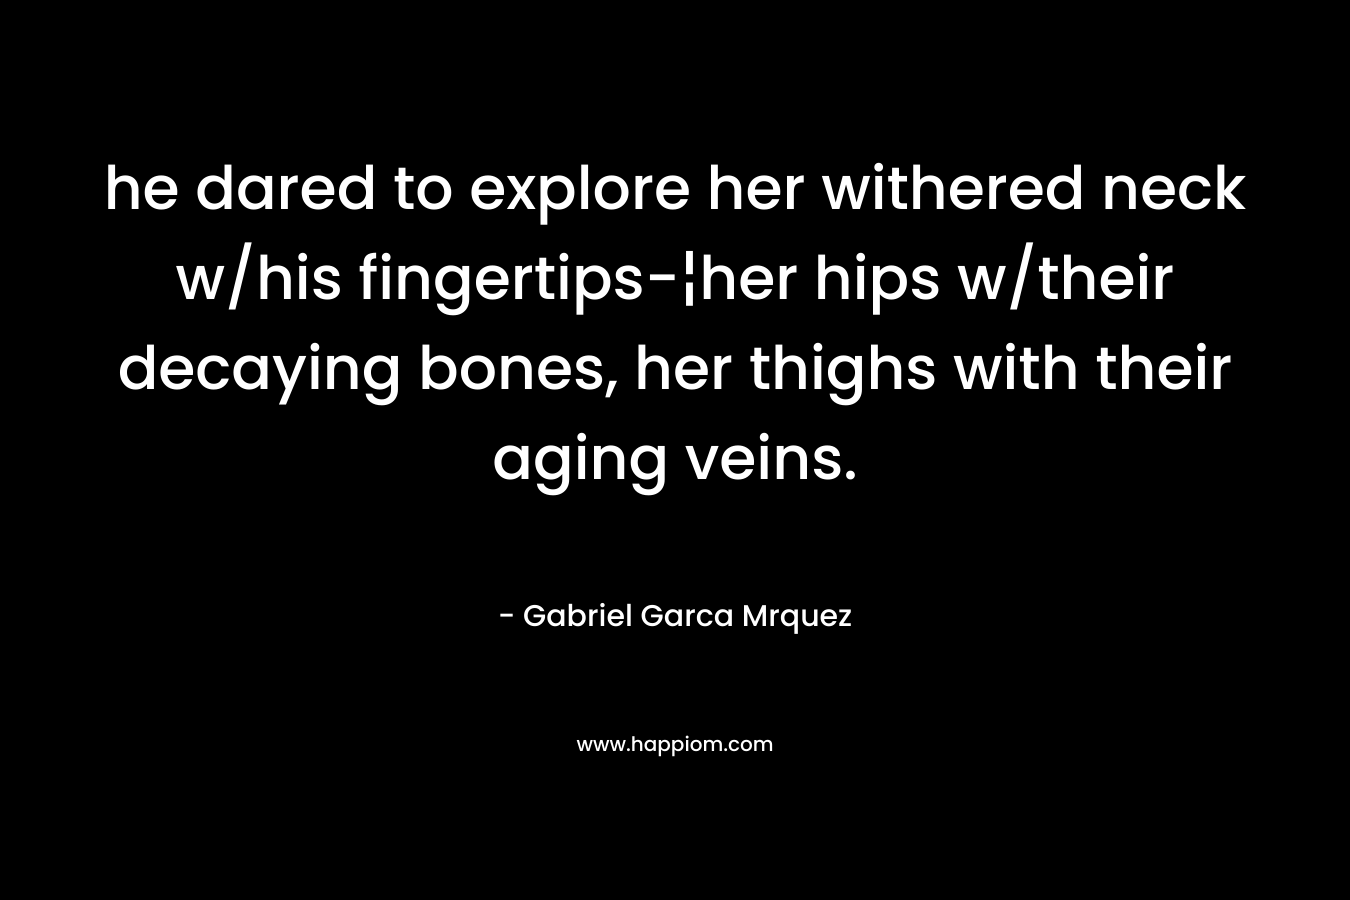 he dared to explore her withered neck w/his fingertips-¦her hips w/their decaying bones, her thighs with their aging veins. – Gabriel Garca Mrquez